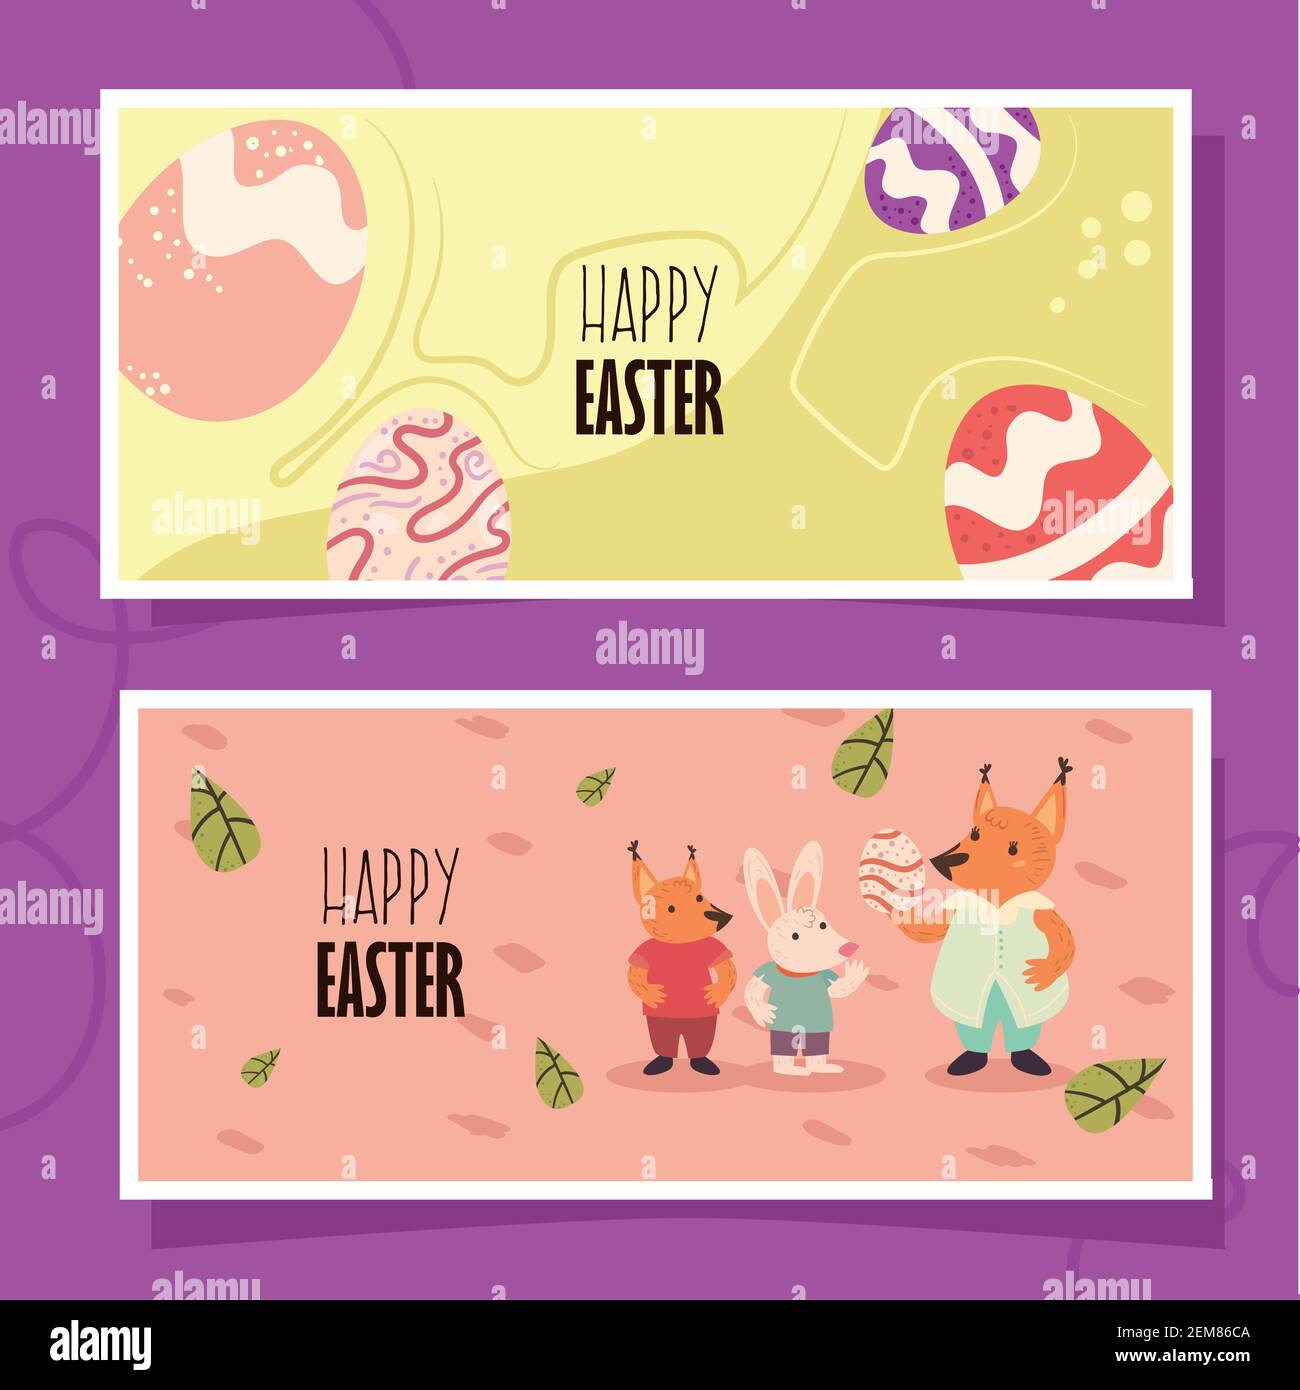 Happy easter posters on purple background Stock Vector